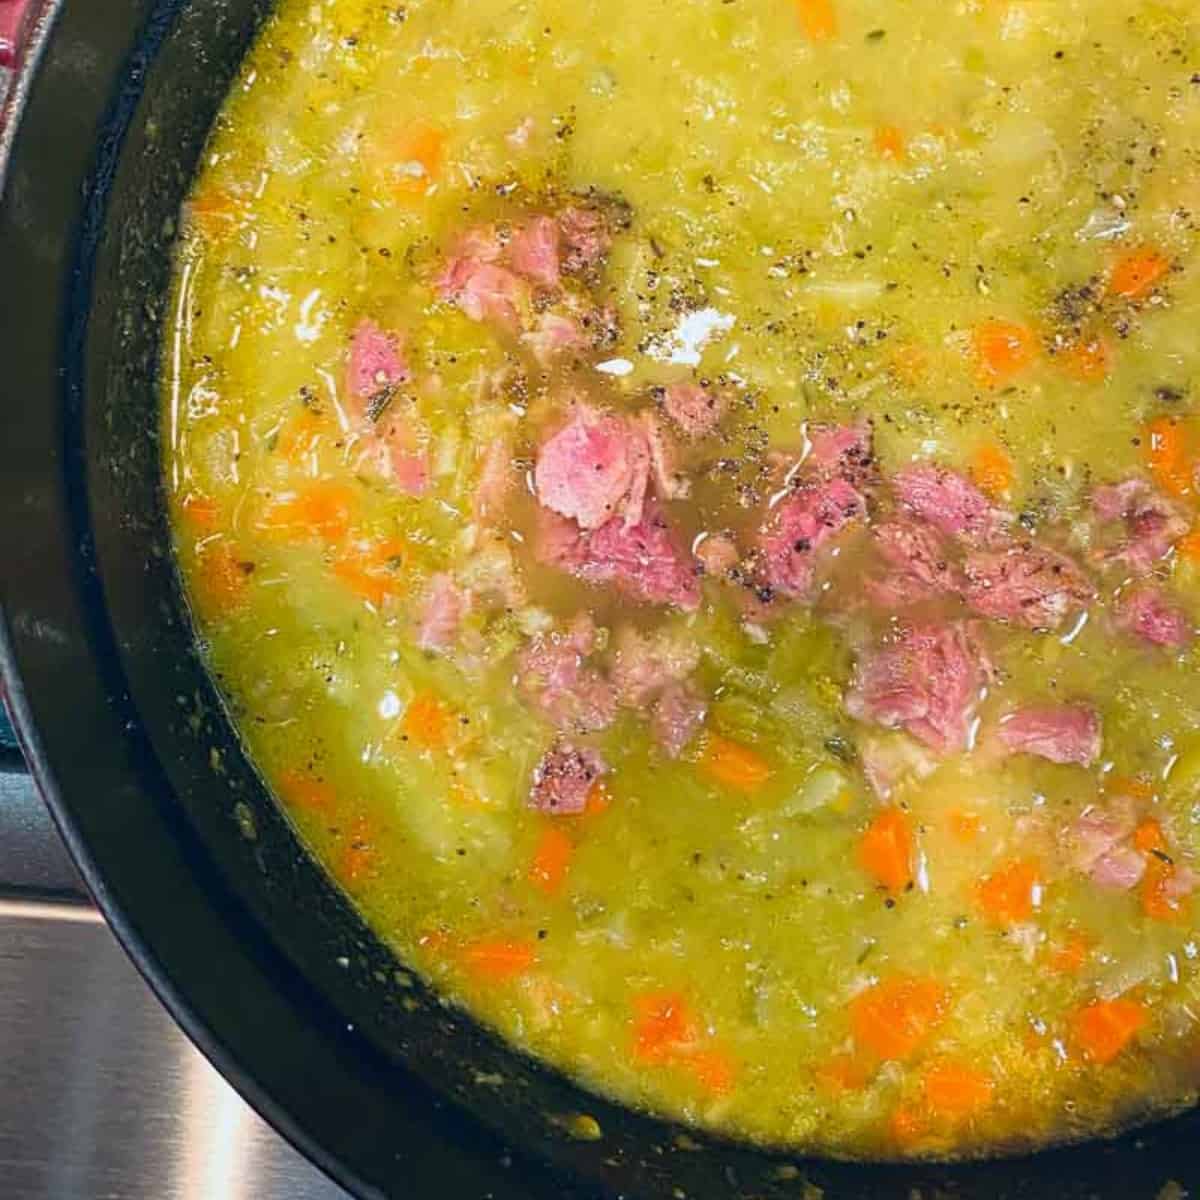 Split pea soup made with smoked ham hock. This ultra delicious split pean soup is easy to make and super satisfying.